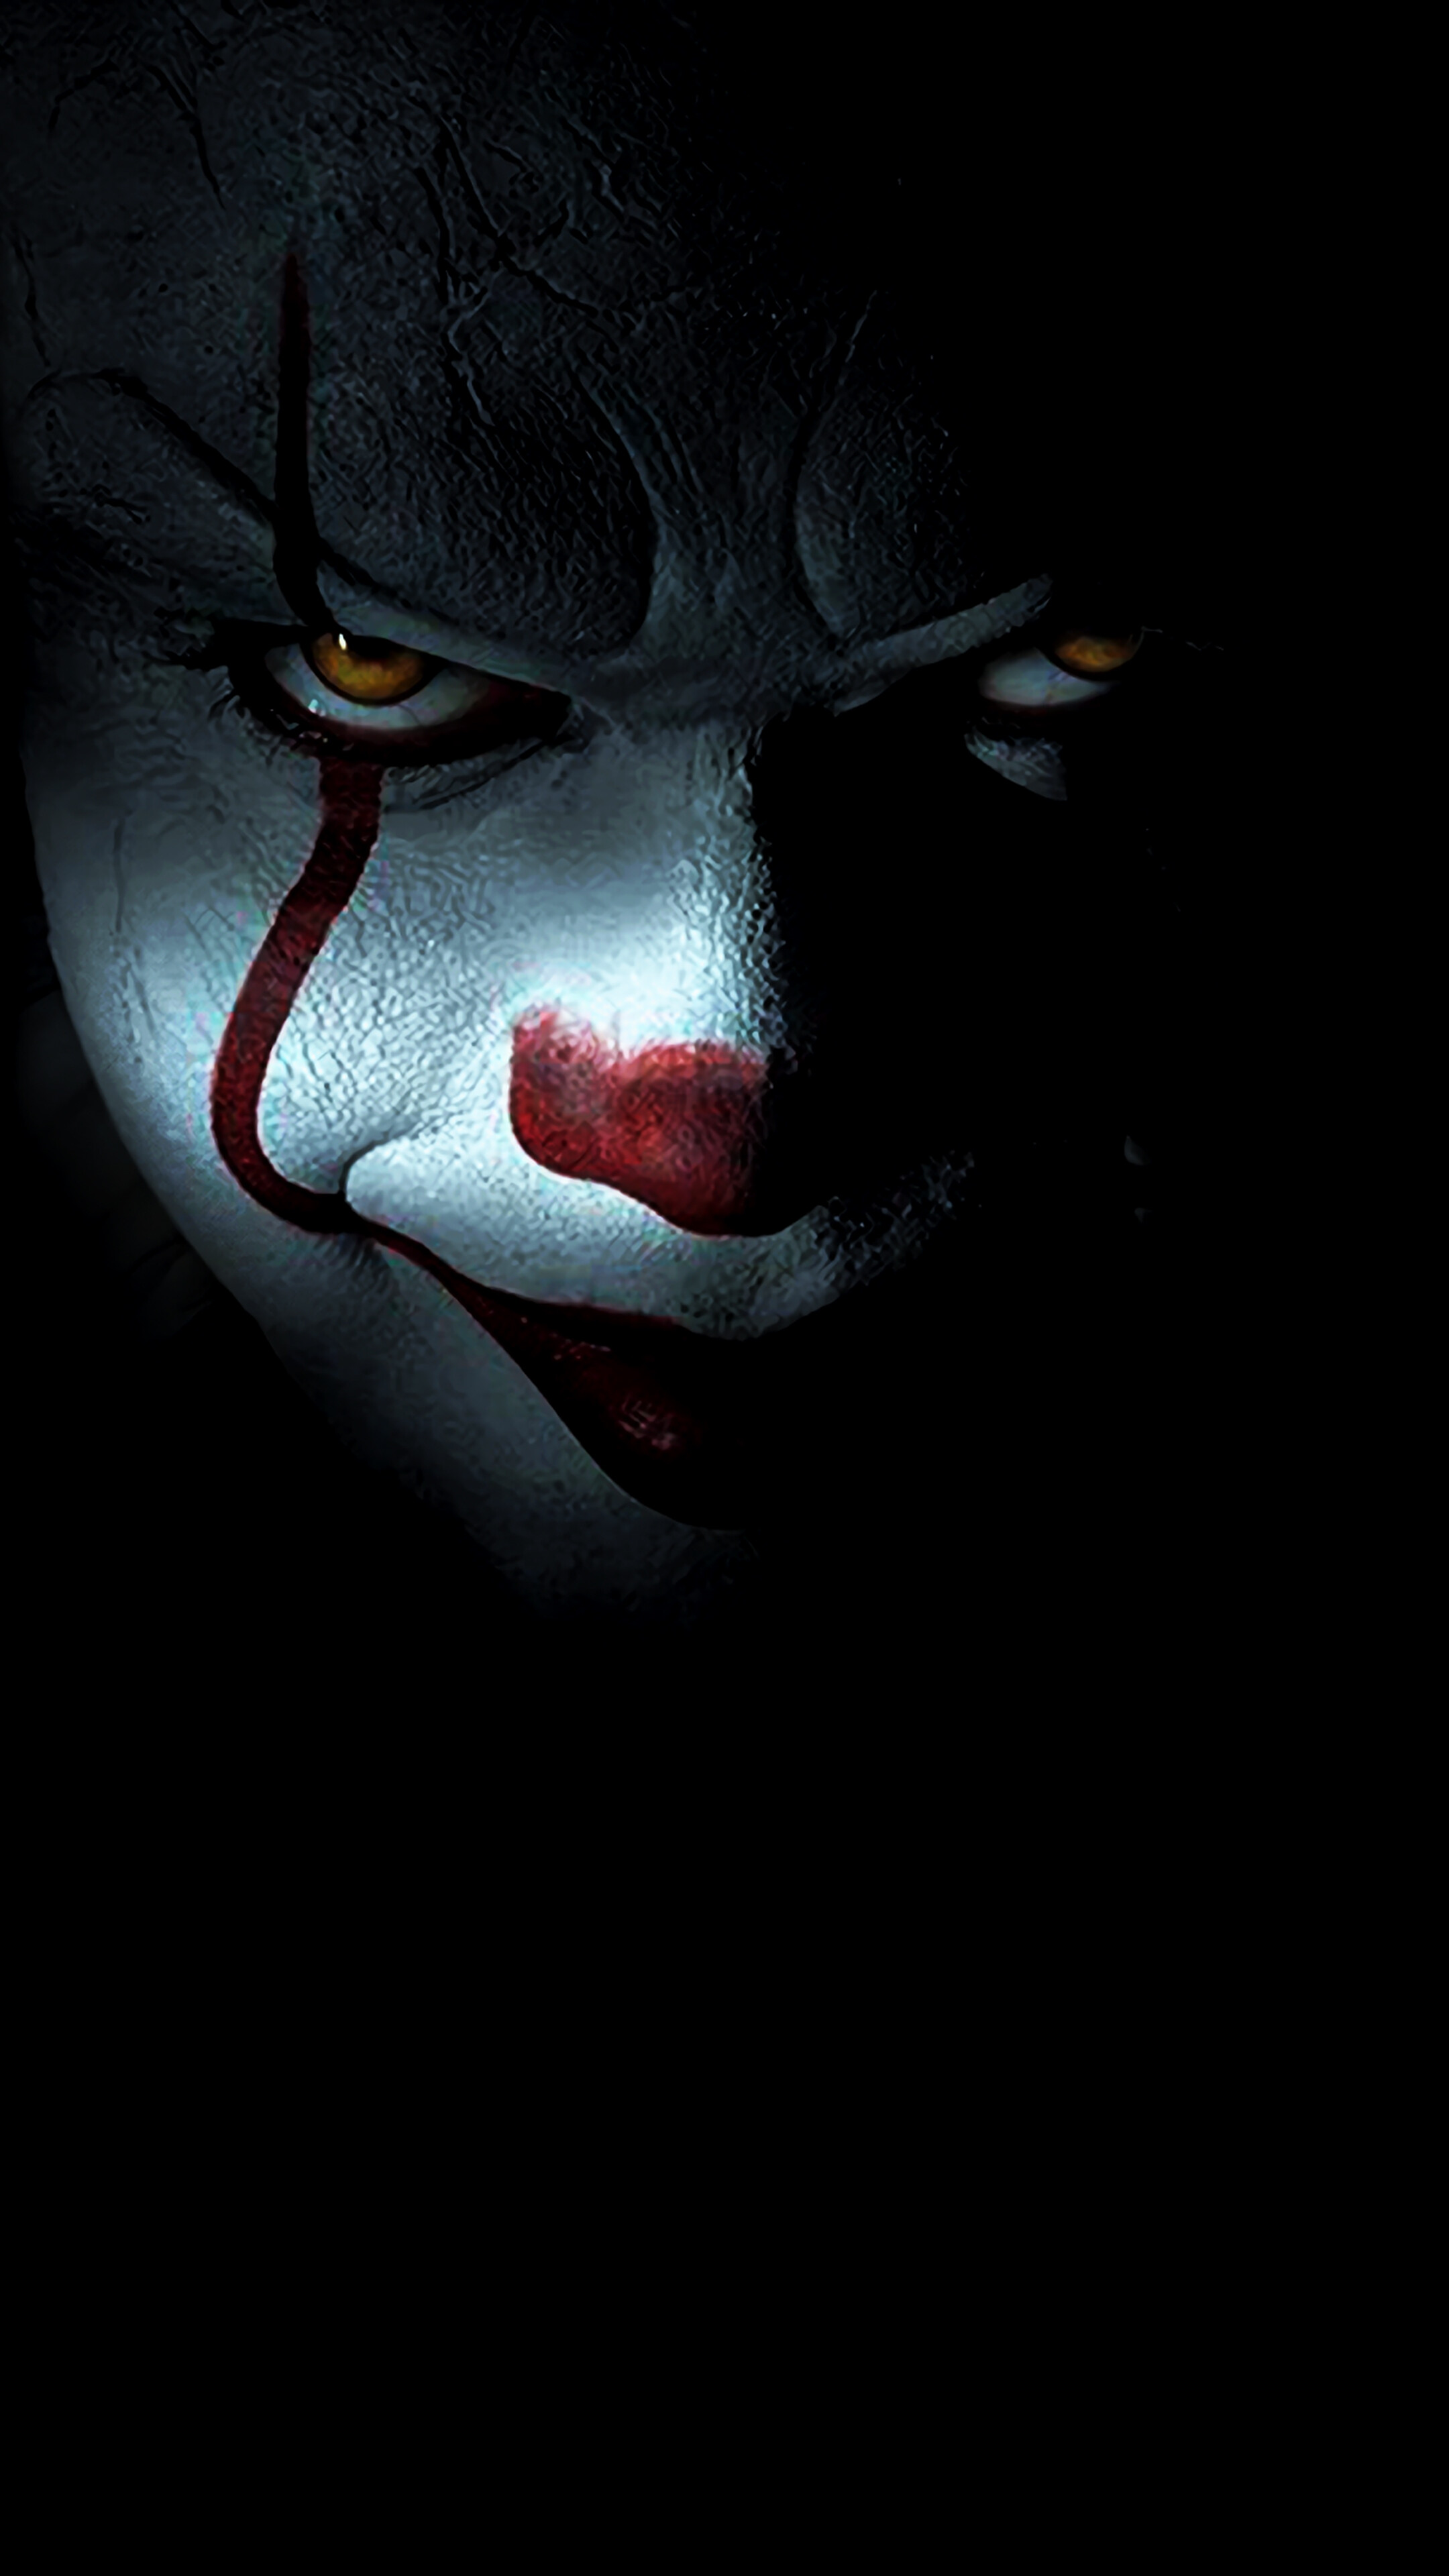 Pennywise Chapter 2 Wallpaper